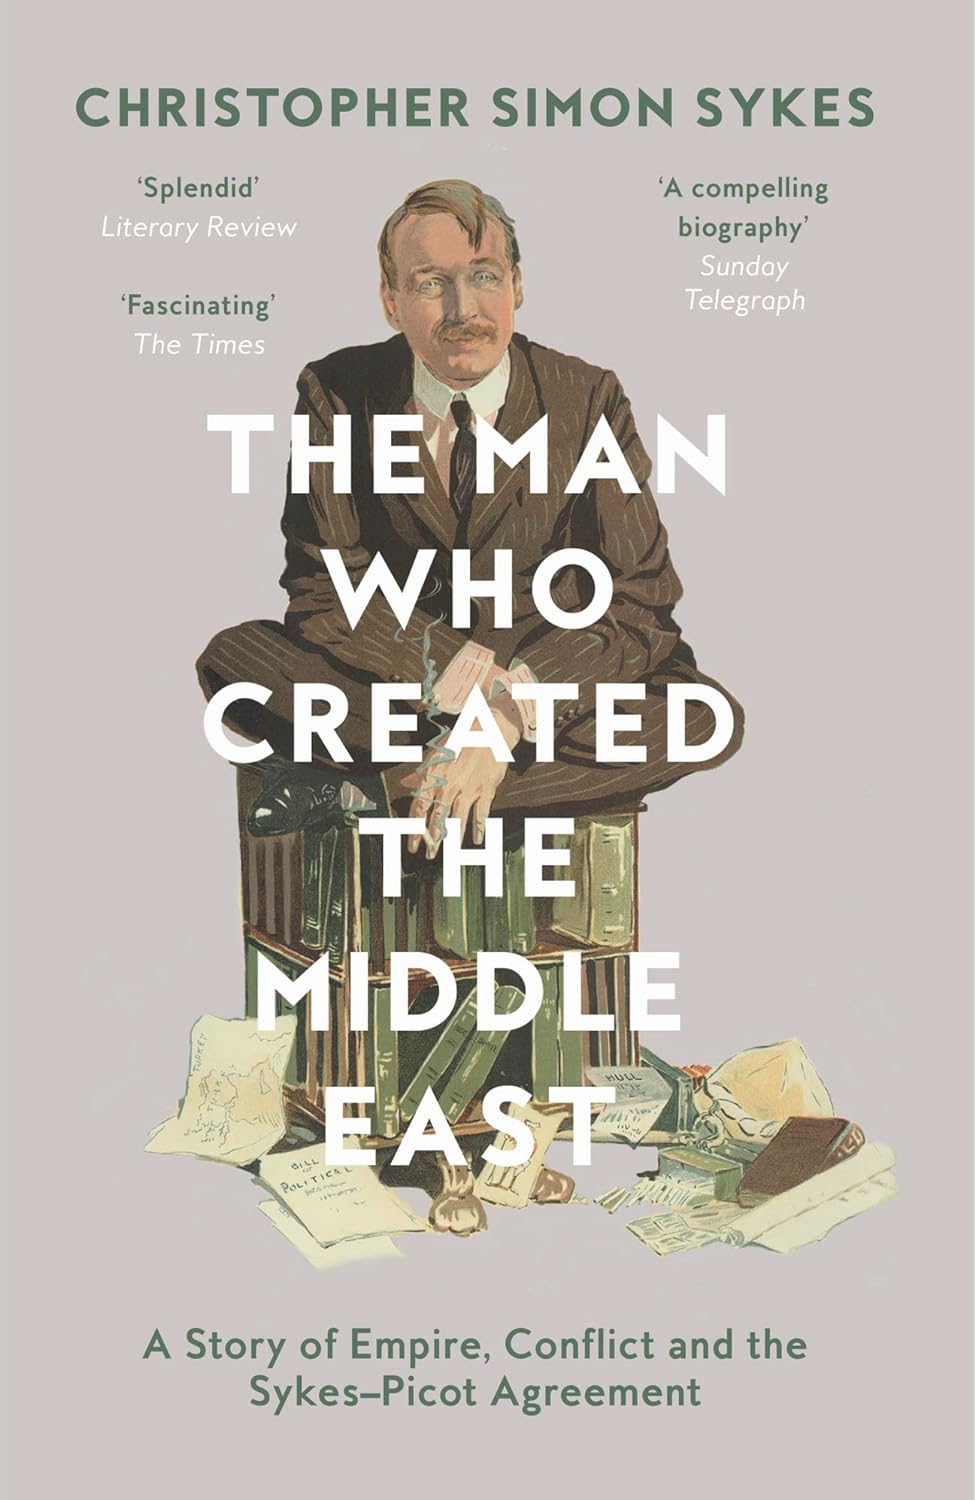 The Man Who Created The Middle East: A Story Of Empire, Conflict and the Sykes-Picot Agreement